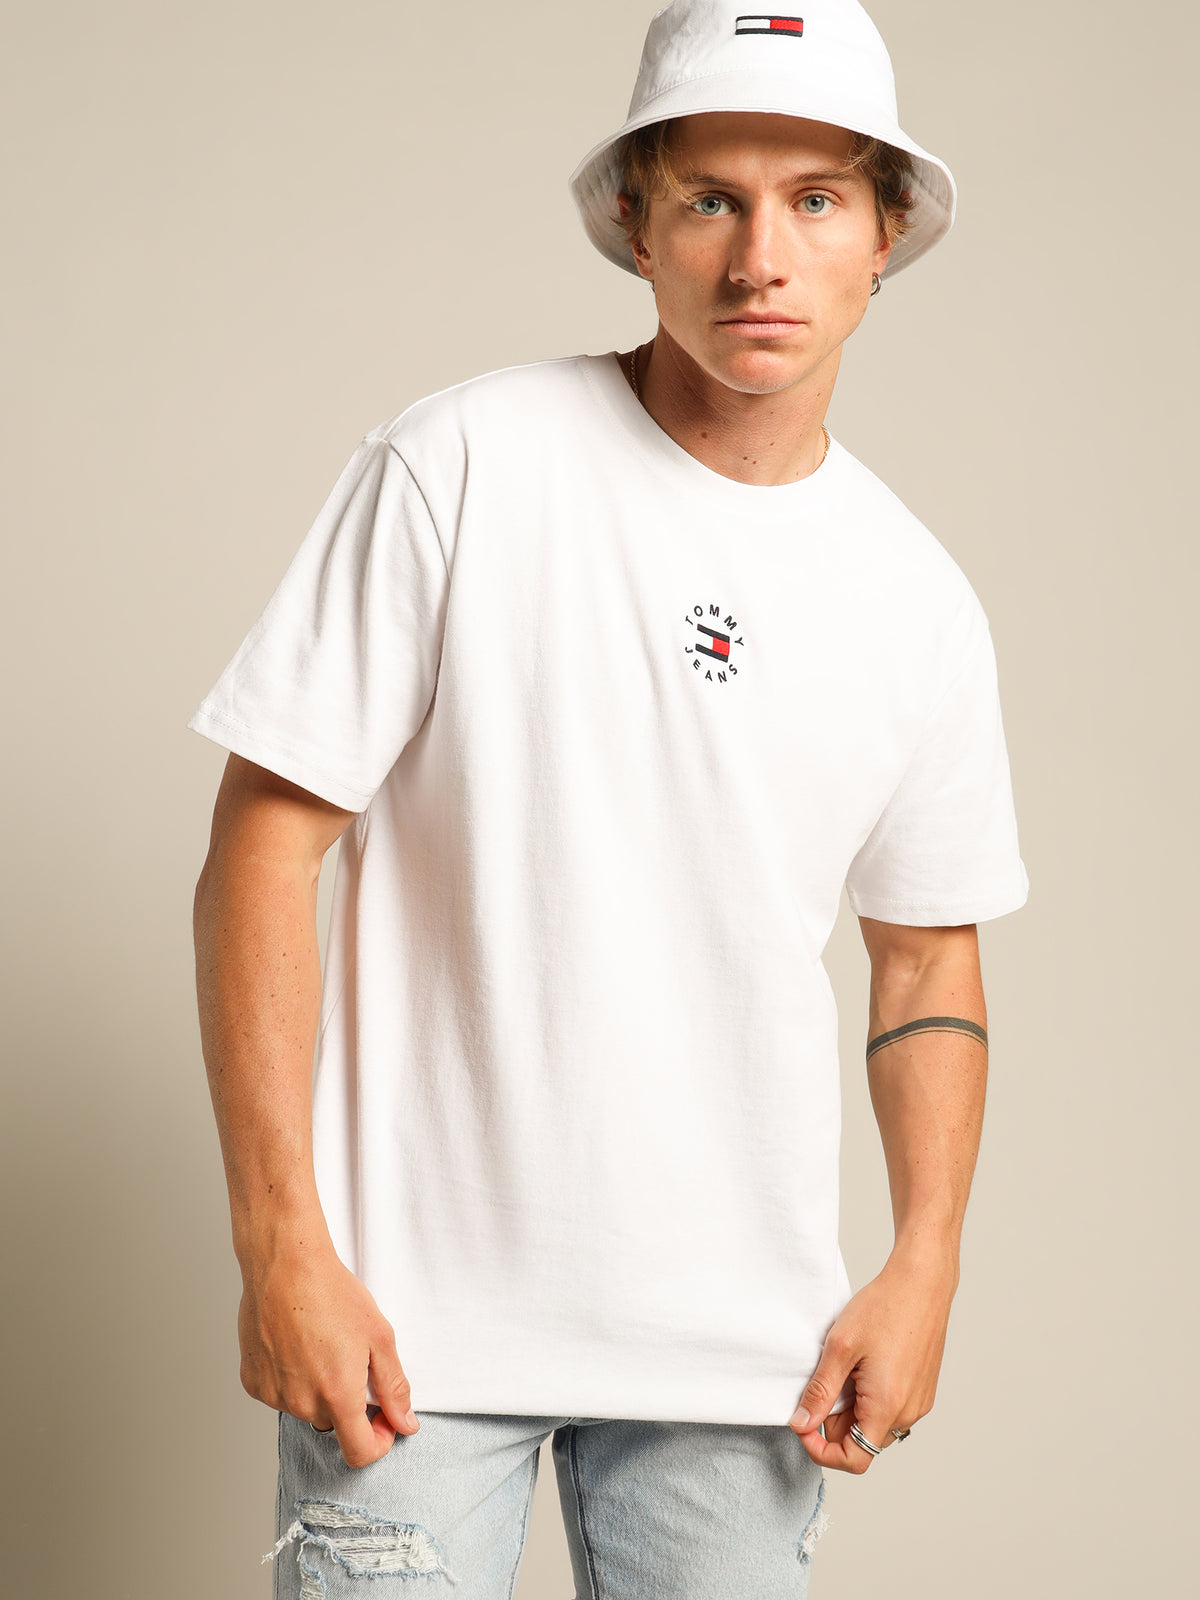 Tiny Tommy Circular Logo T-Shirt in White